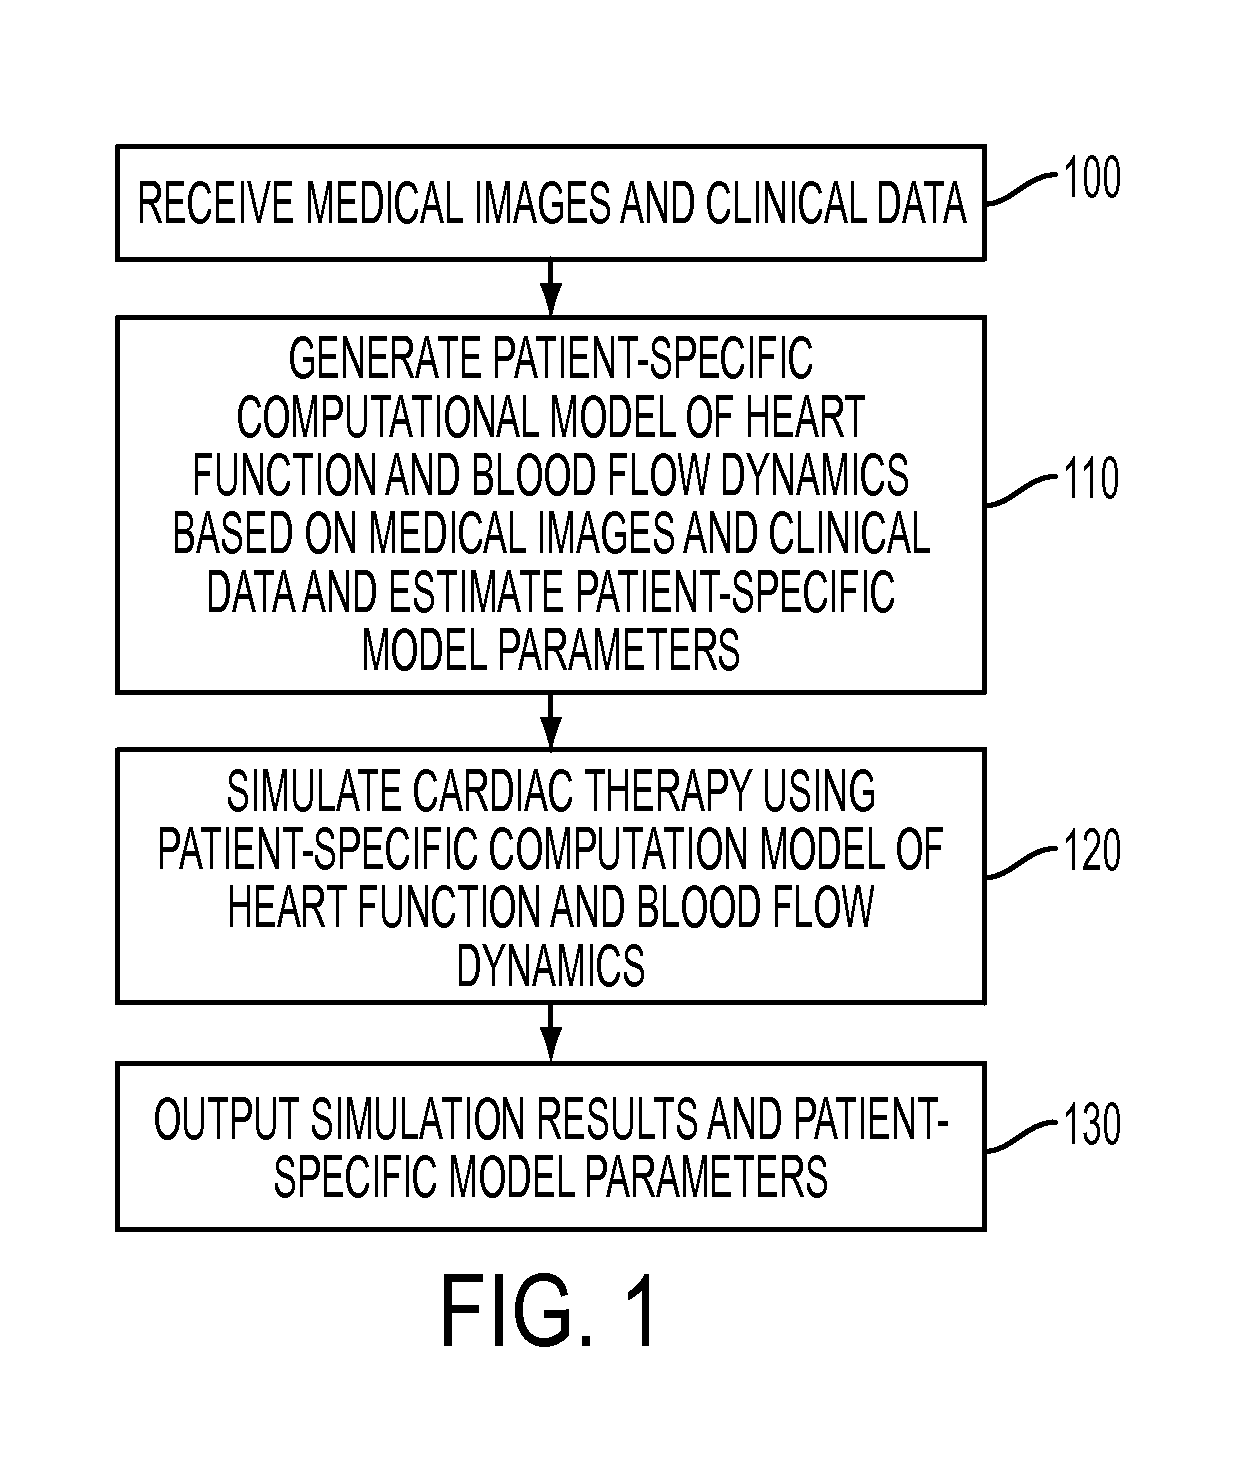 Method and System for Advanced Measurements Computation and Therapy Planning from Medical Data and Images Using a Multi-Physics Fluid-Solid Heart Model